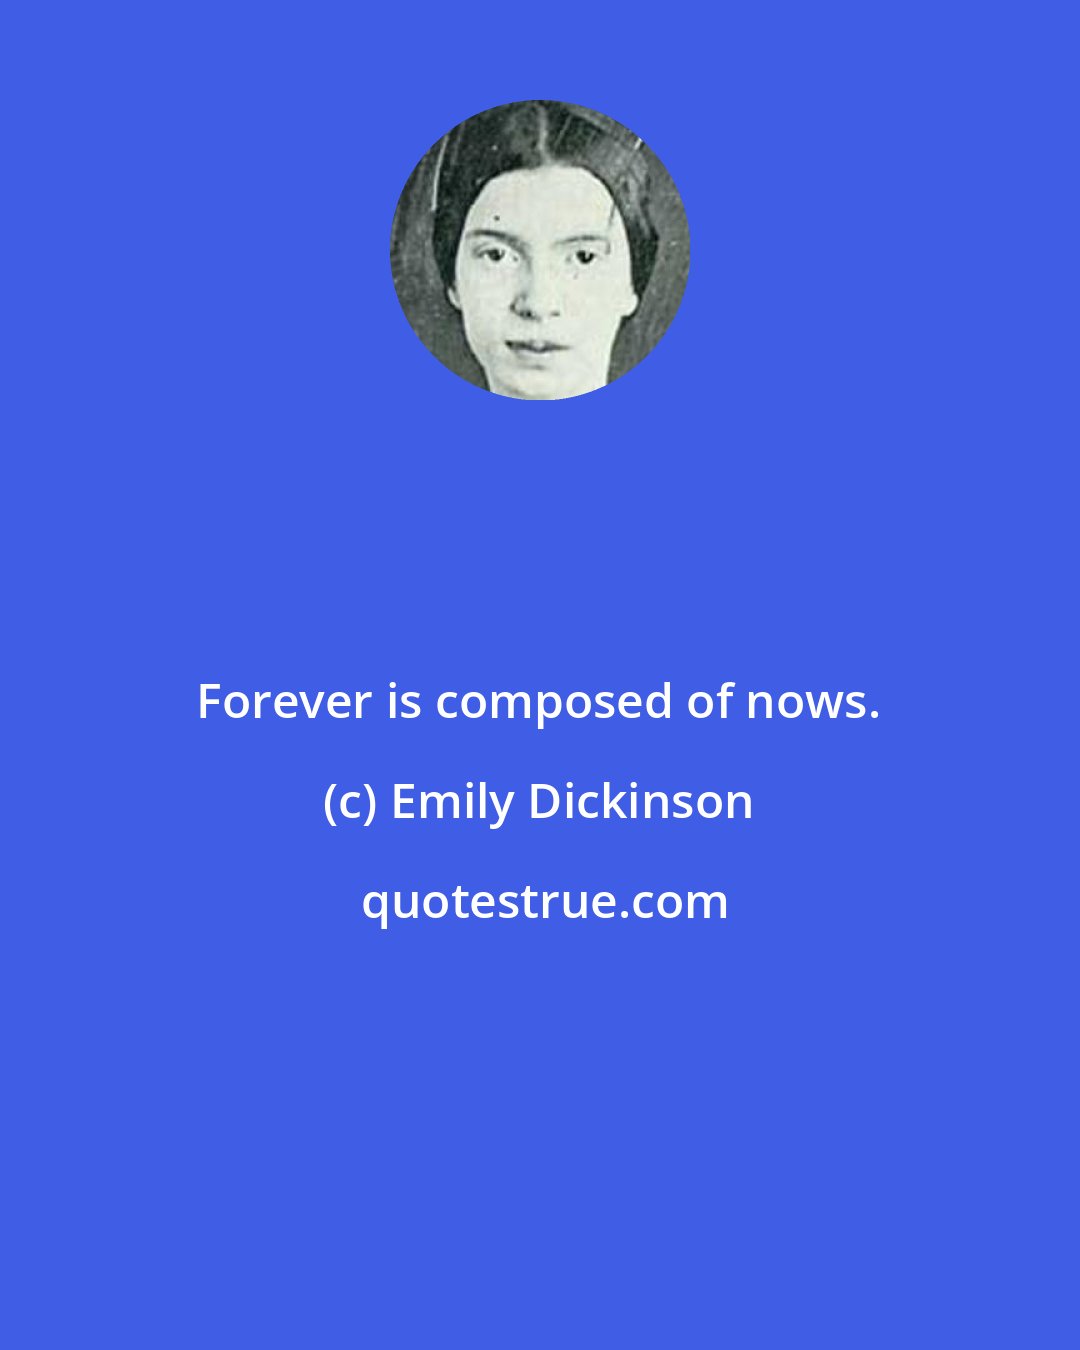 Emily Dickinson: Forever is composed of nows.